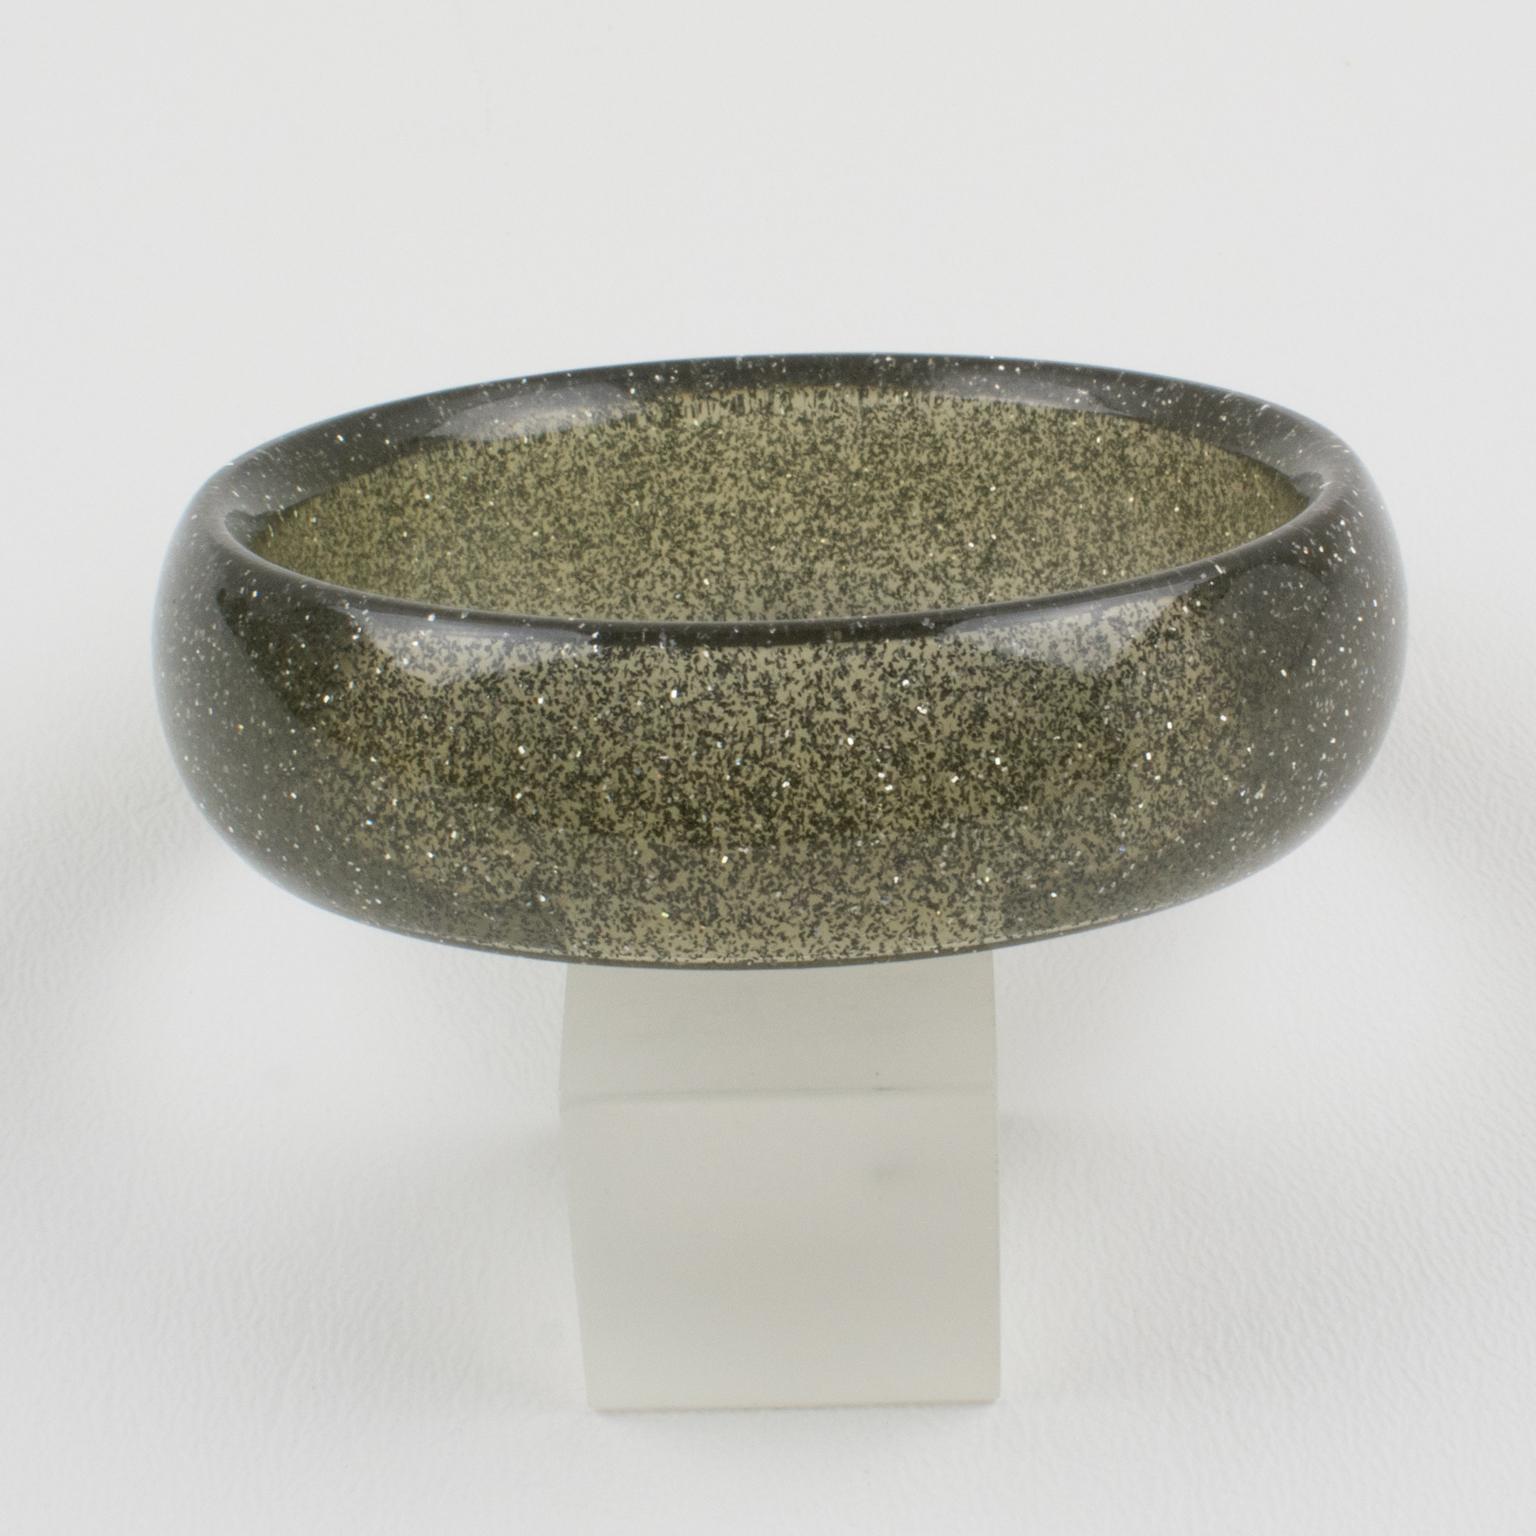 Charming Lucite bracelet bangle. The bangle has a domed shape and is comprised of transparent smoked gray Lucite, which is injected with metallic confetti inclusions in silver color. The metallic confetti glitter is like that of Christmas